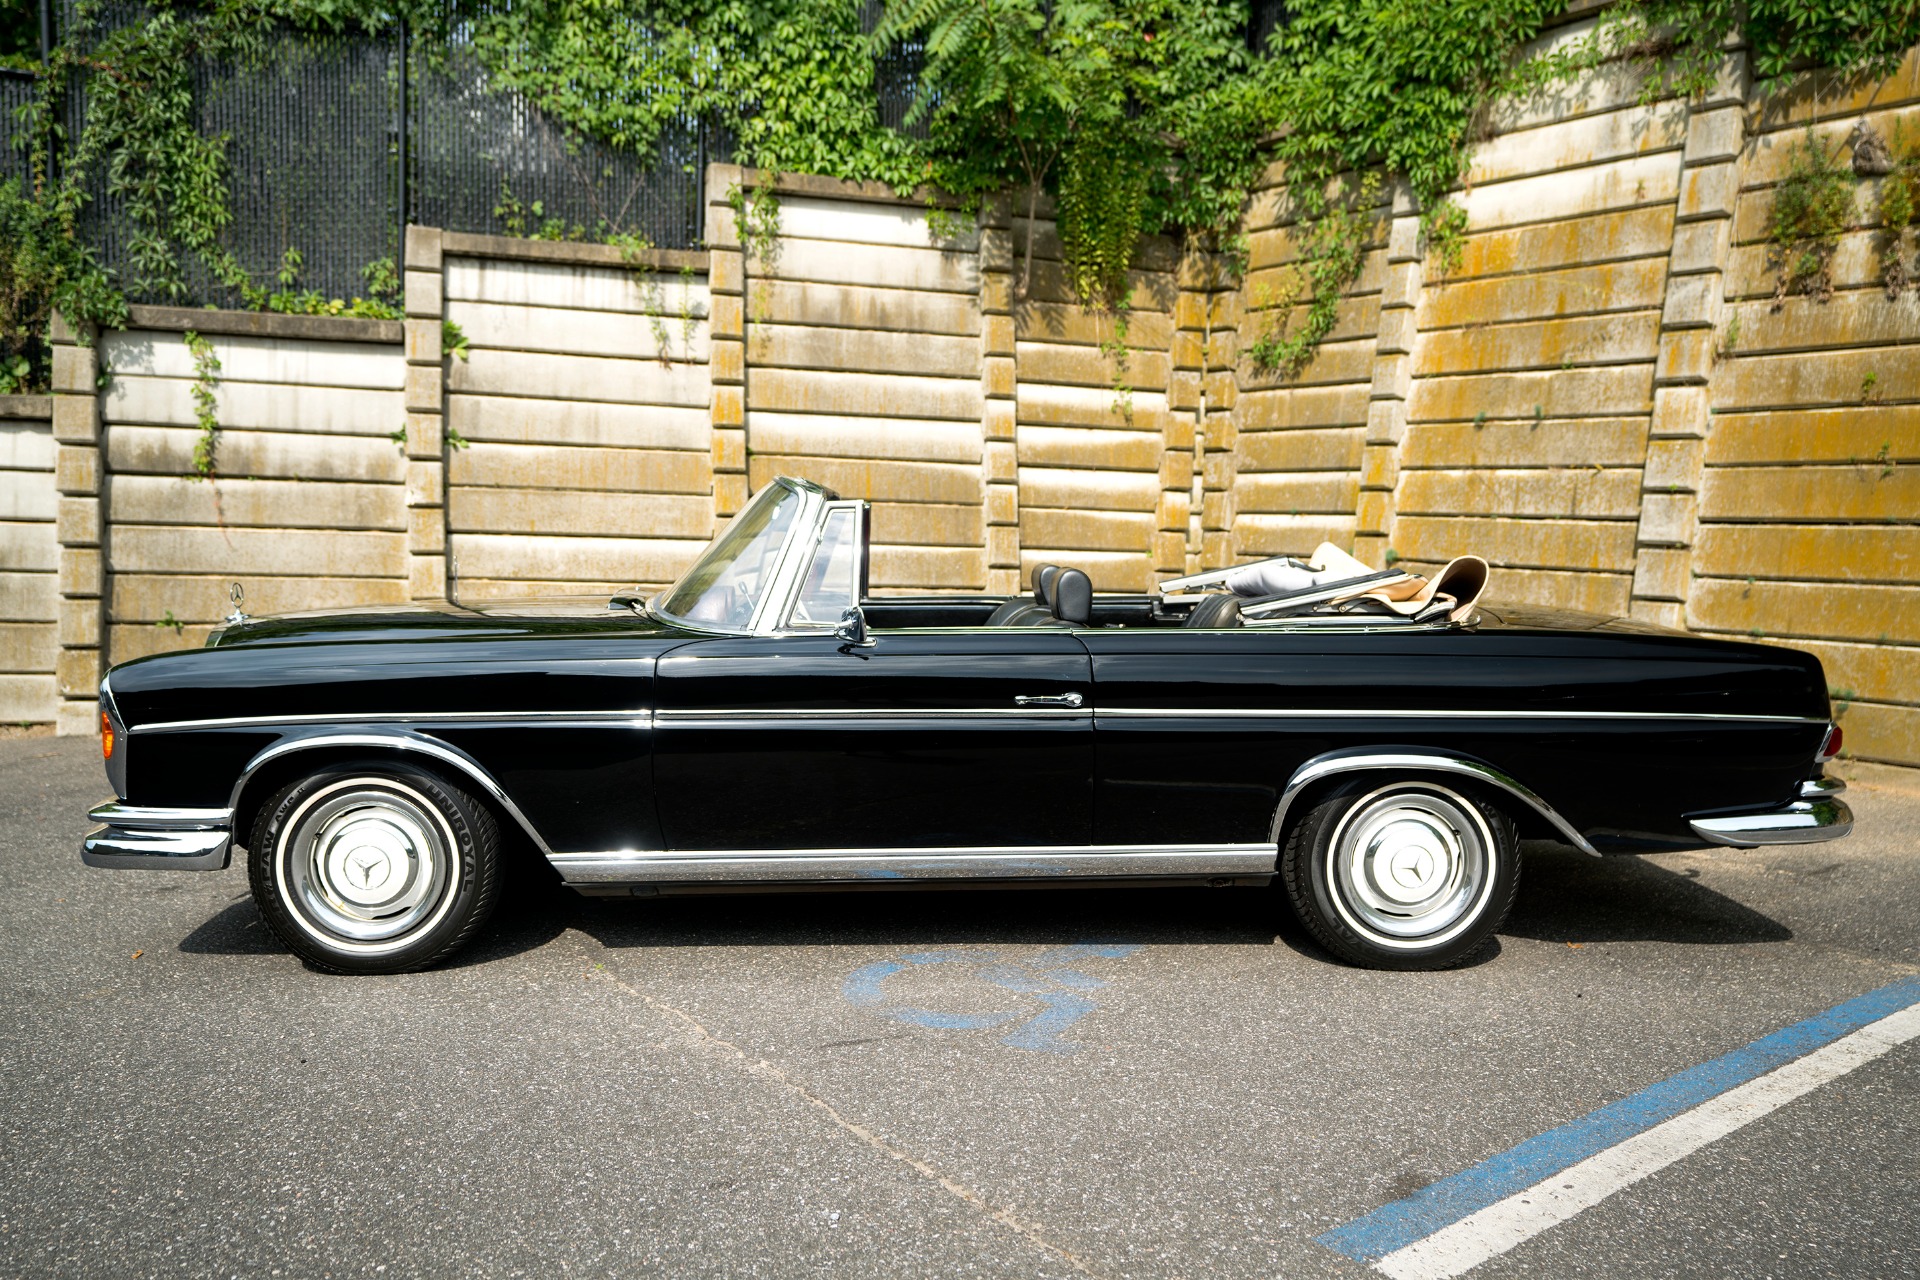 1966 Mercedes-Benz 250SE CONVERTIBLE Stock # 1340 for sale near Oyster